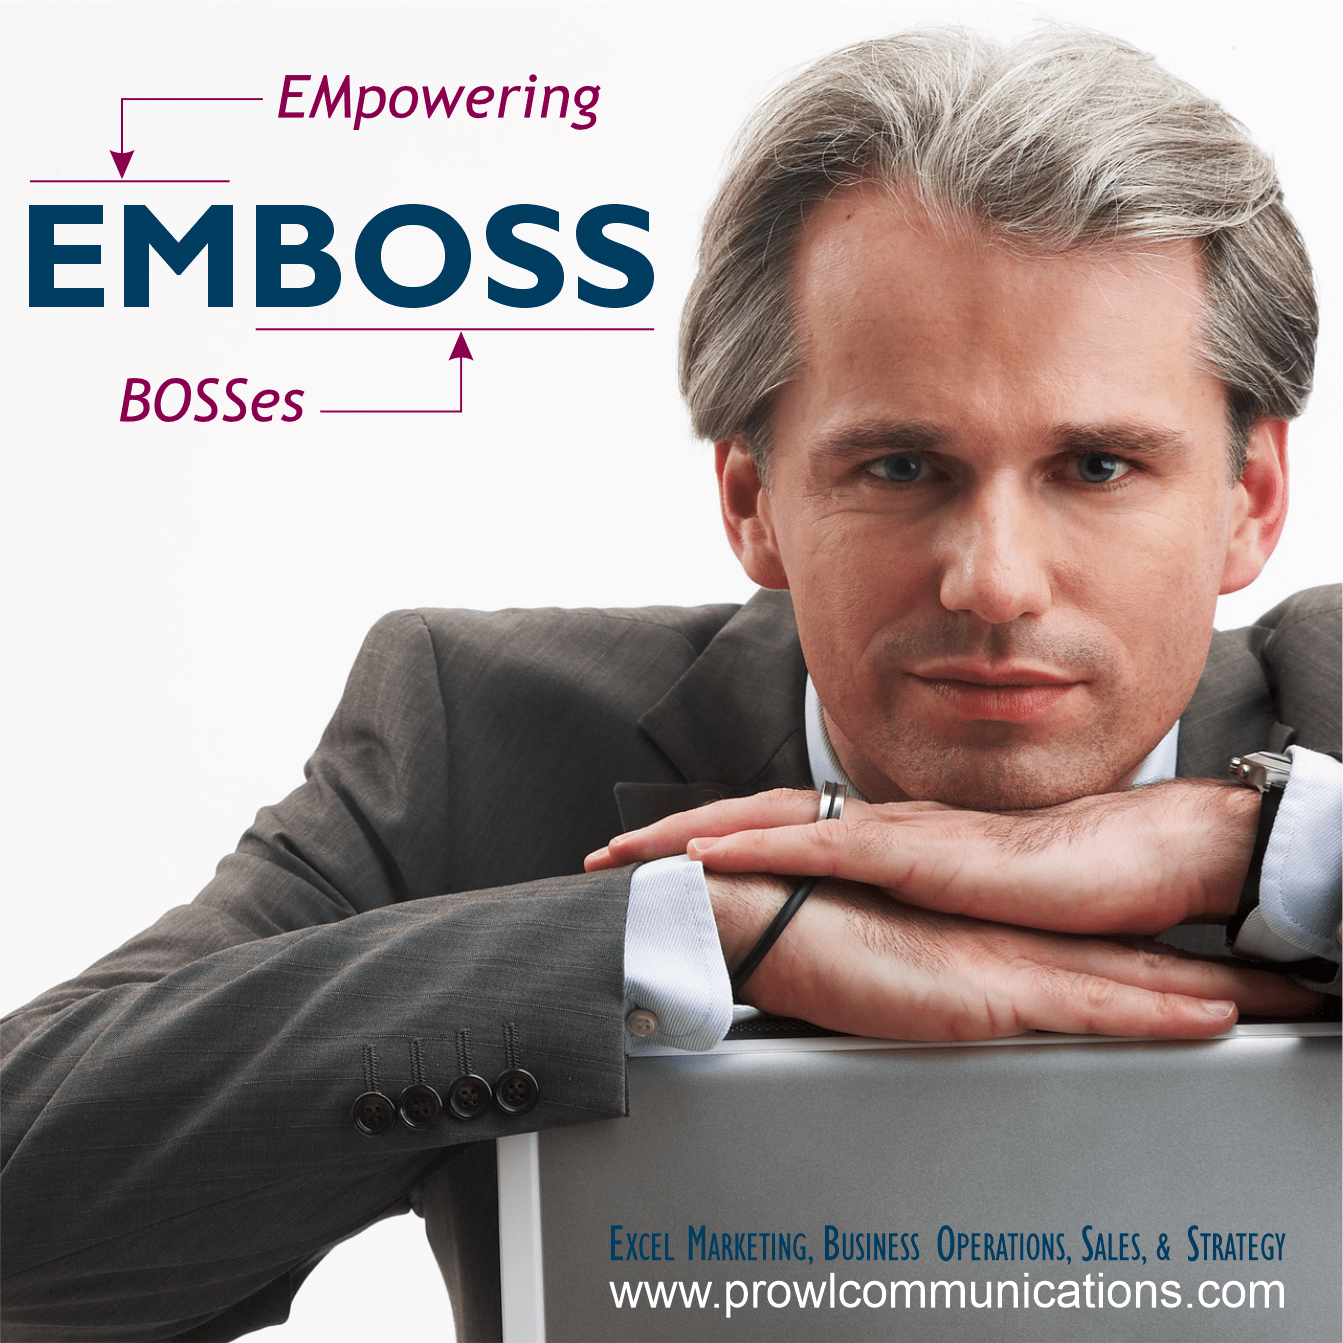 empowering bosses male image